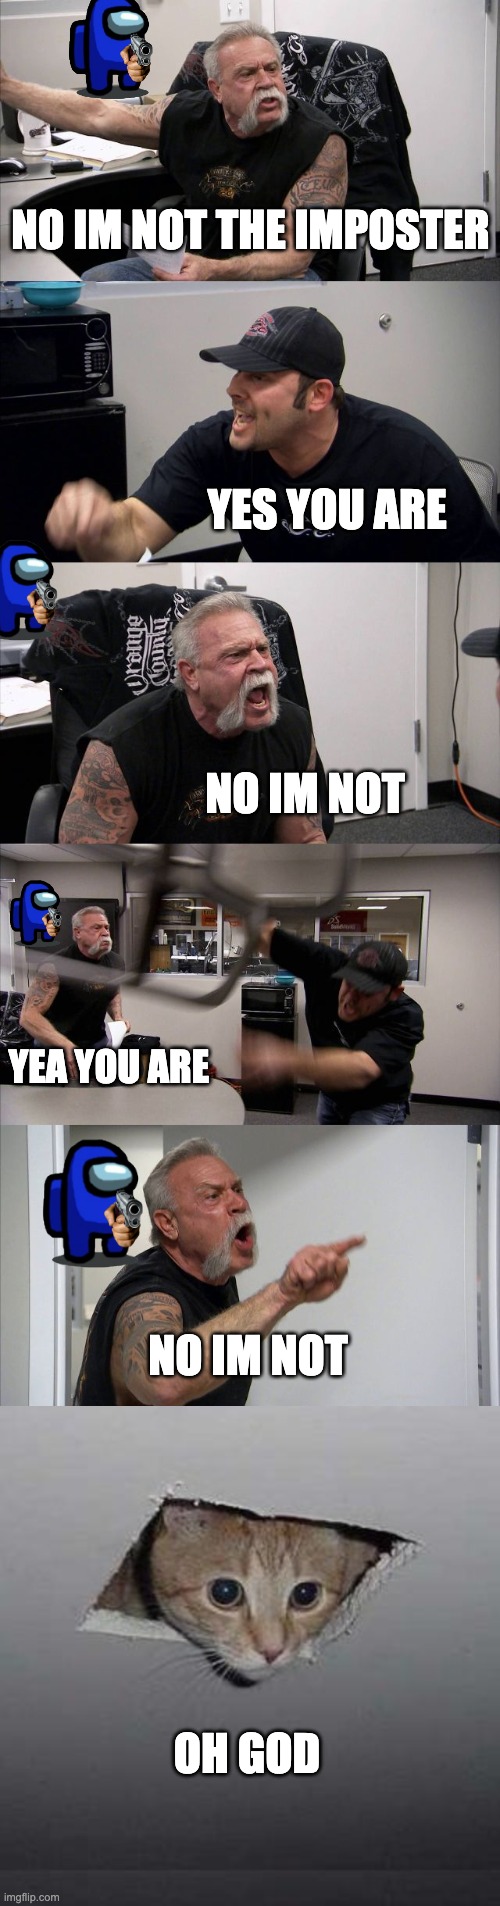 NO IM NOT THE IMPOSTER; YES YOU ARE; NO IM NOT; YEA YOU ARE; NO IM NOT; OH GOD | image tagged in memes,american chopper argument,ceiling cat | made w/ Imgflip meme maker